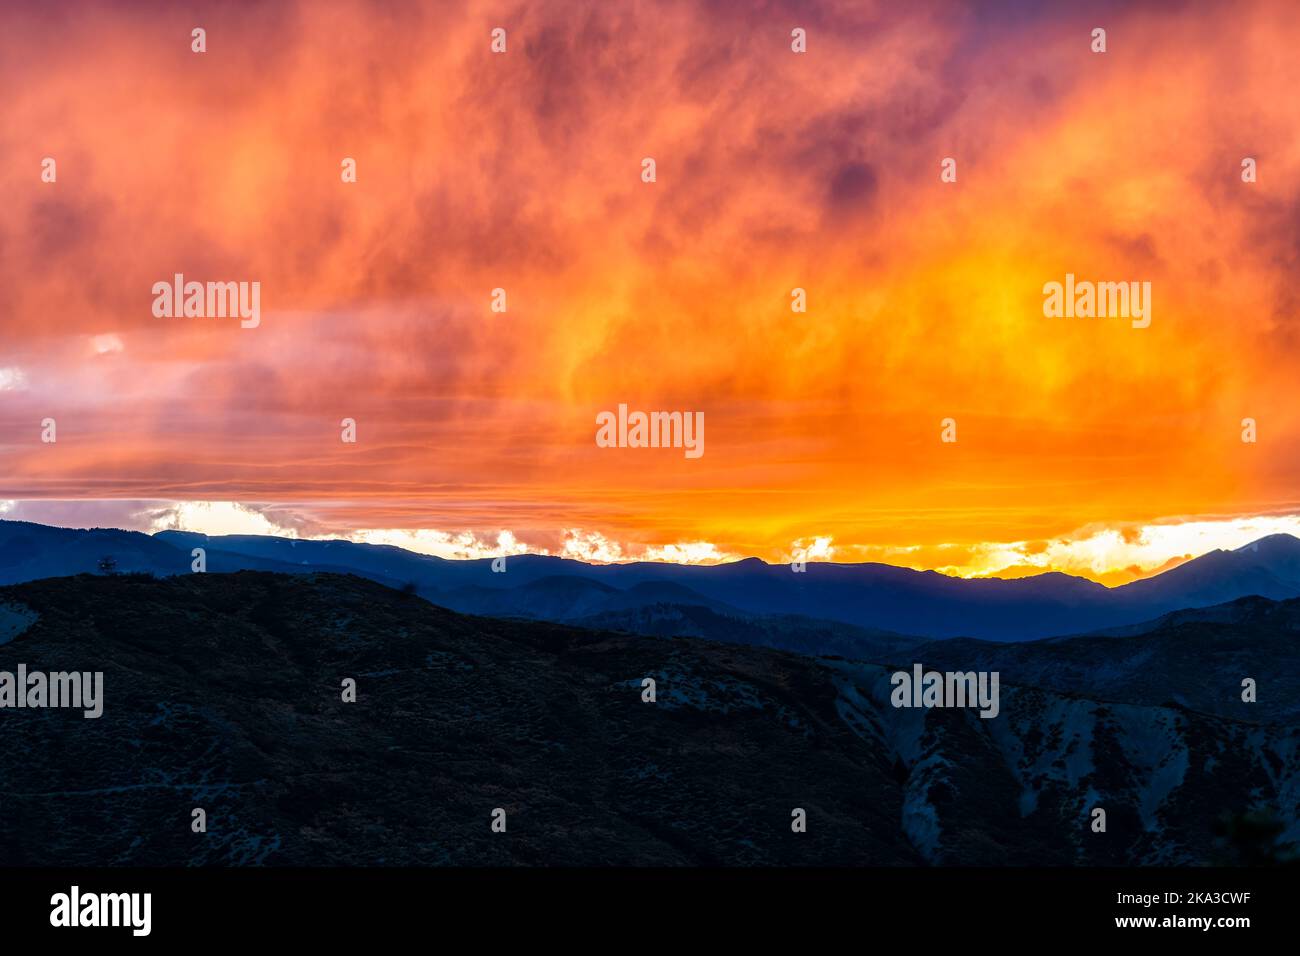 Aspen, Colorado rocky mountains range silhouette at vibrant colorful sunset of orange yellow sky light with clouds in cloudy sky Stock Photo